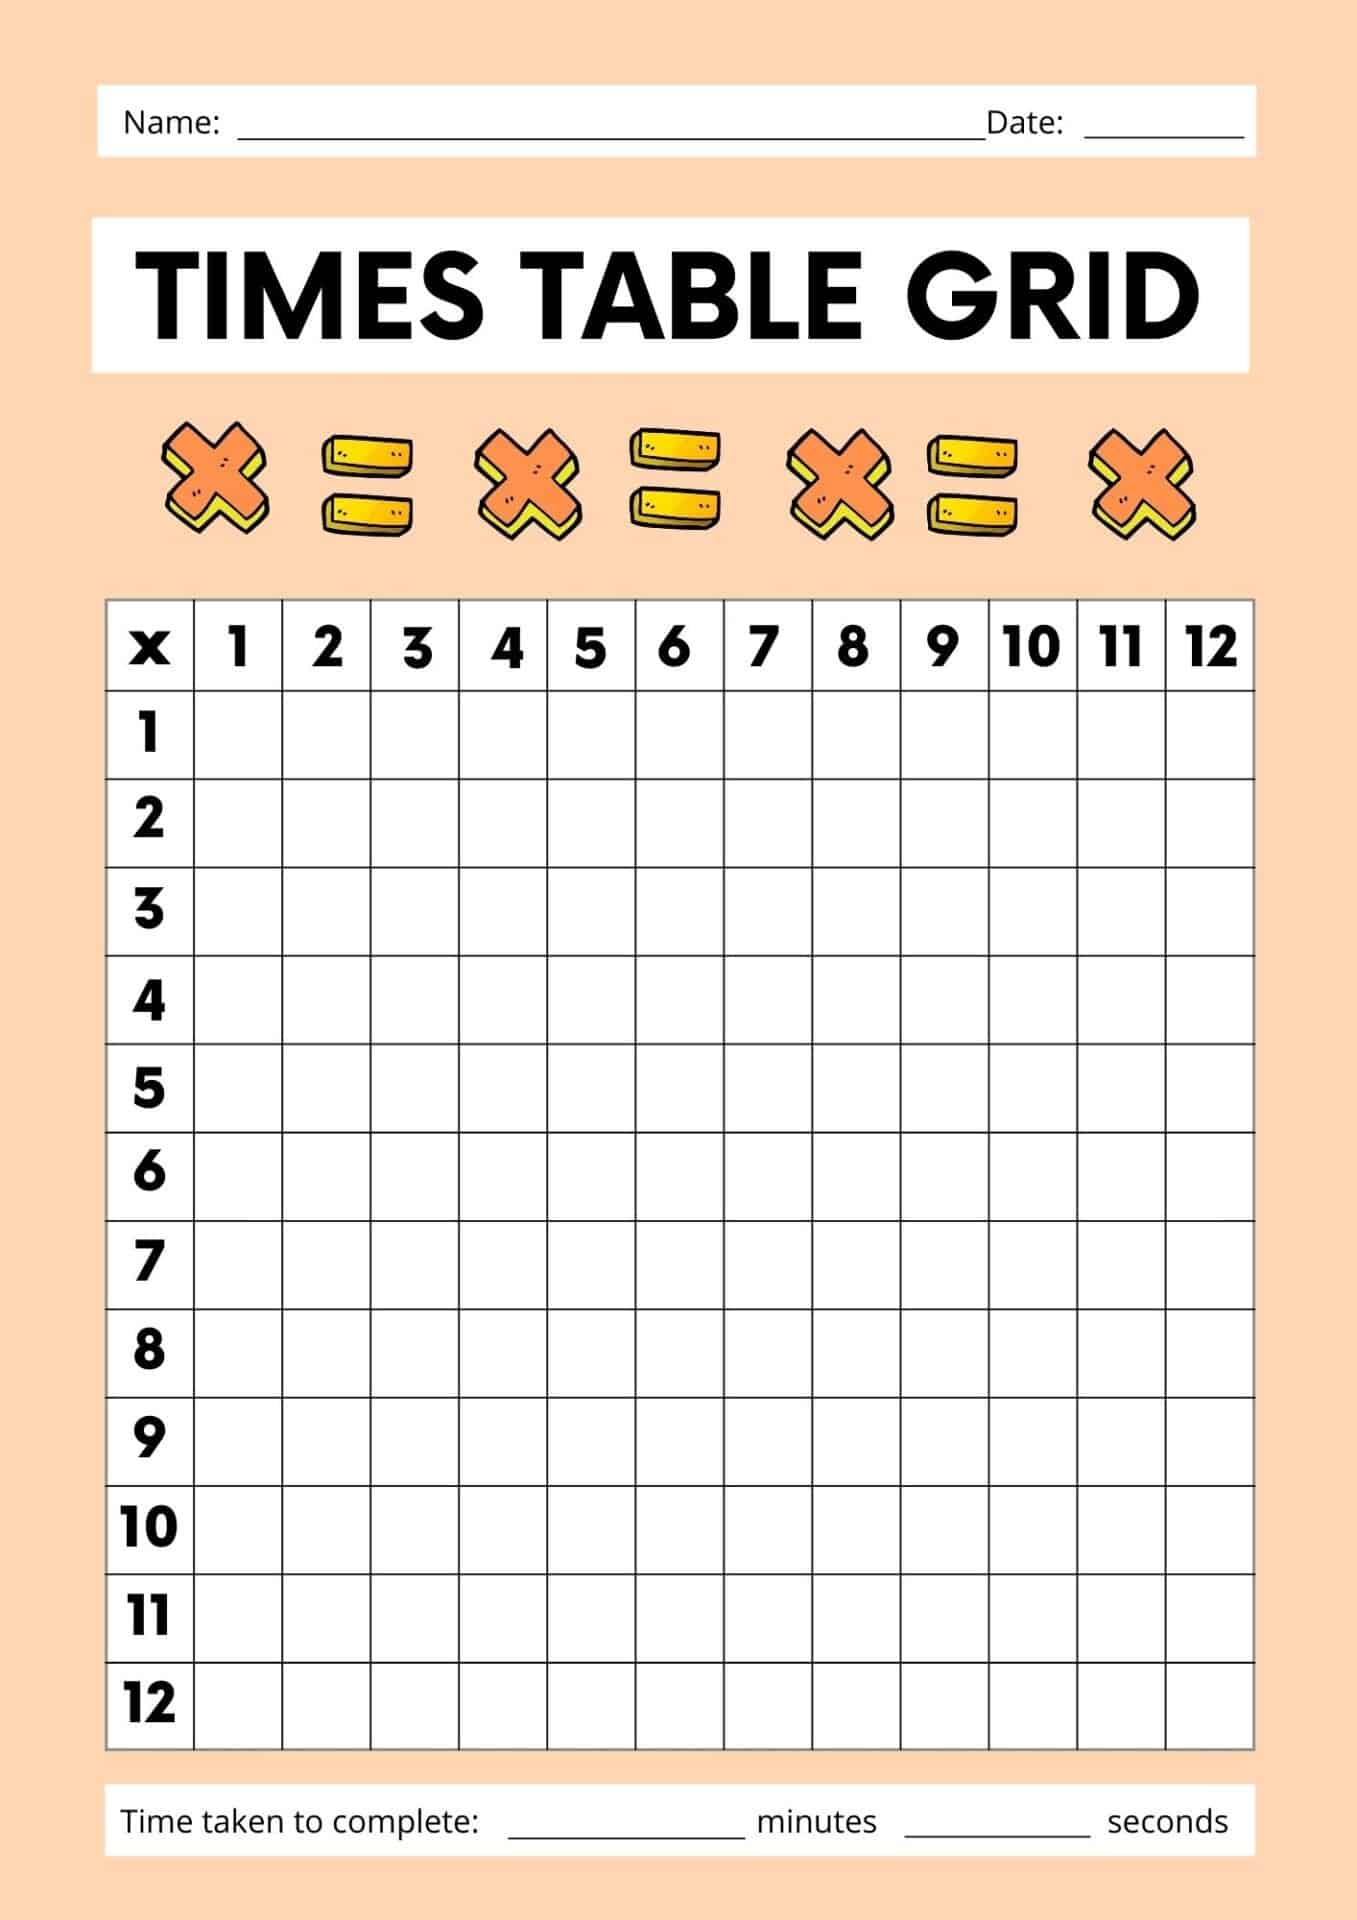 times table grid blank